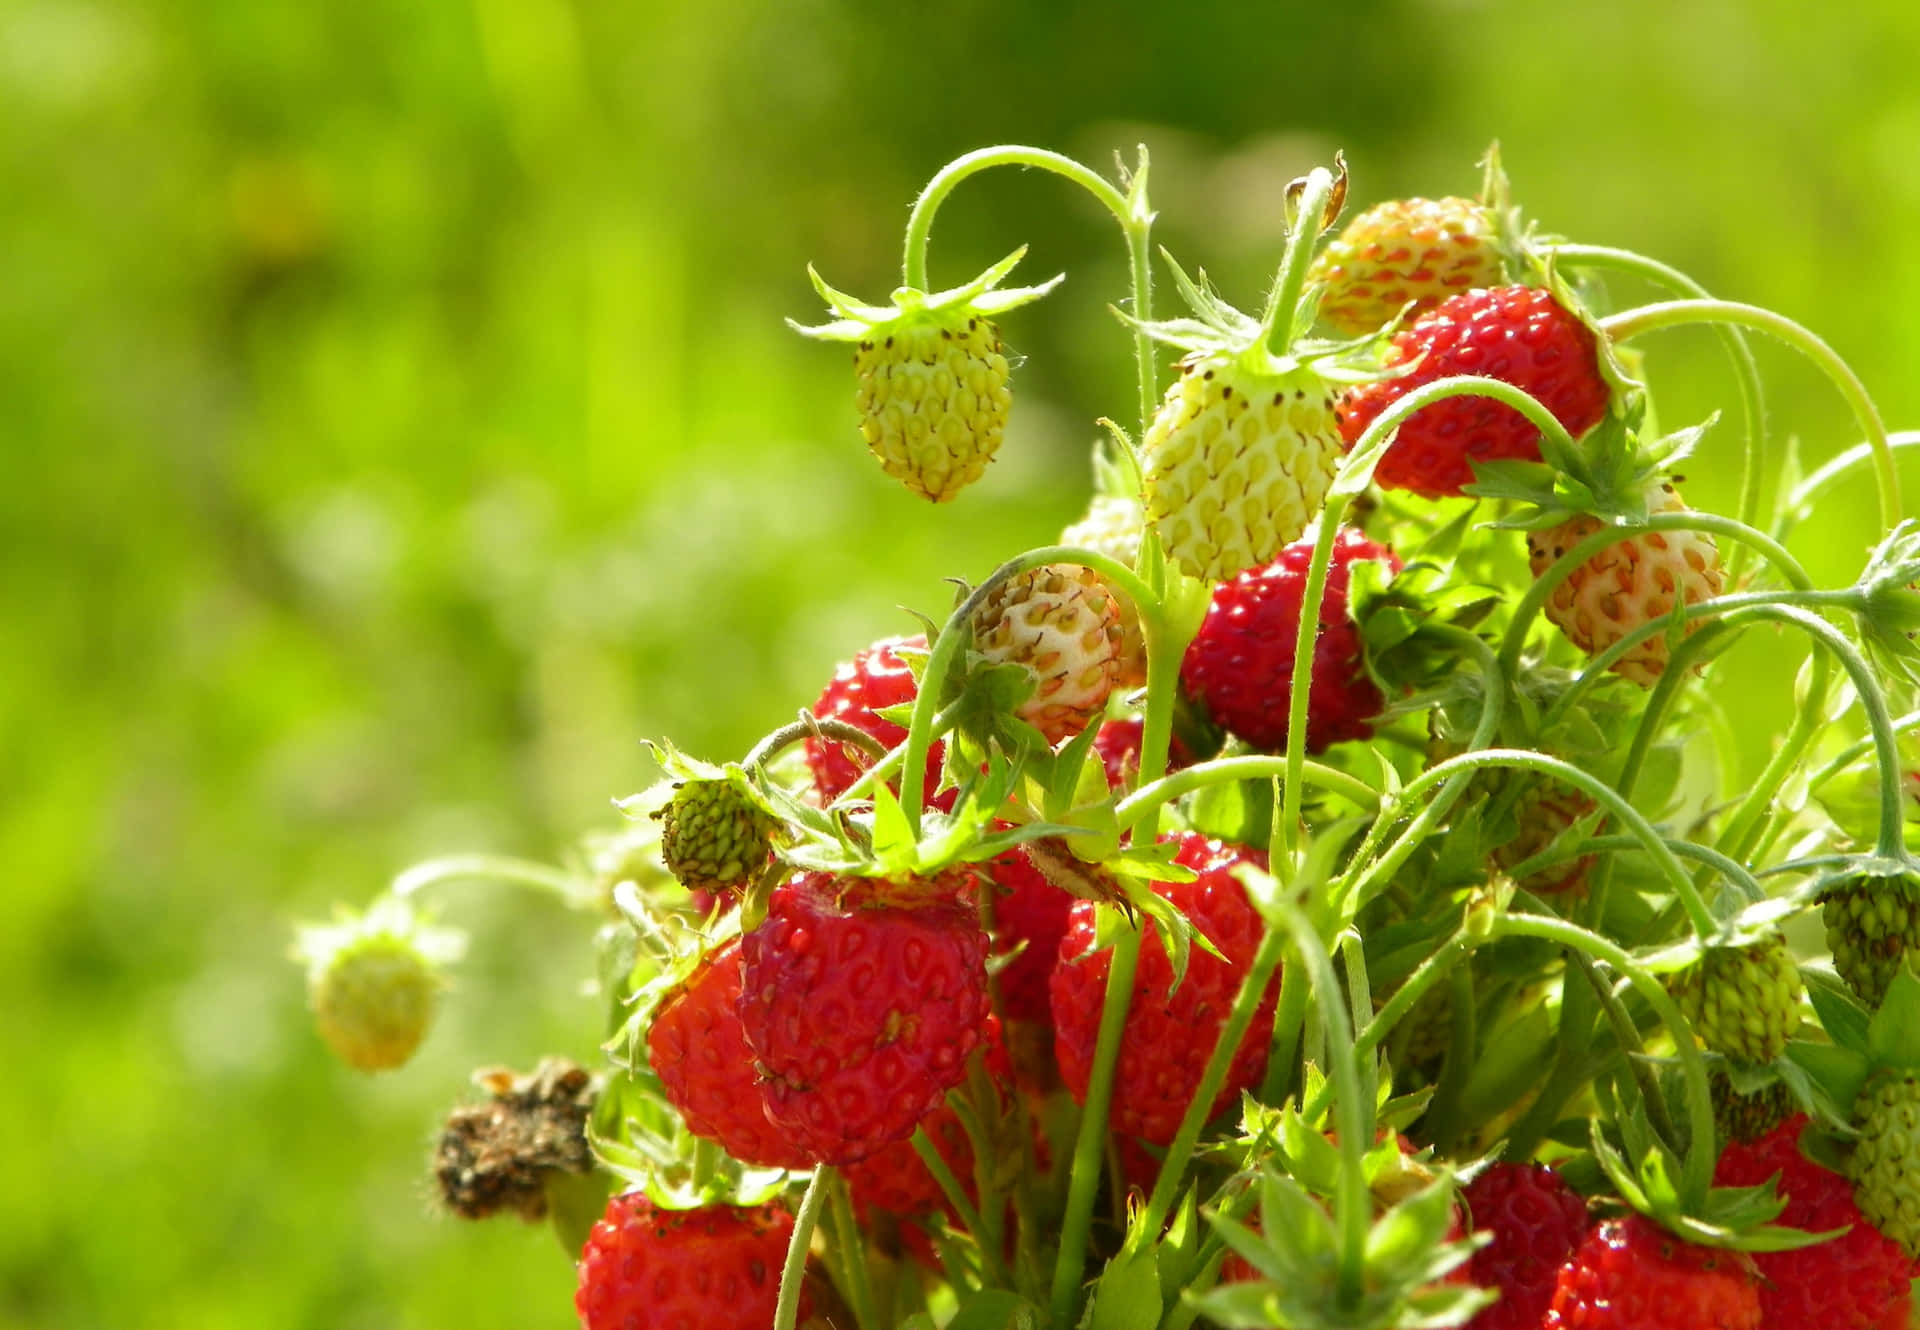 A basket of freshly picked strawberries invite you to indulge in the juicy and flavorful fruit.